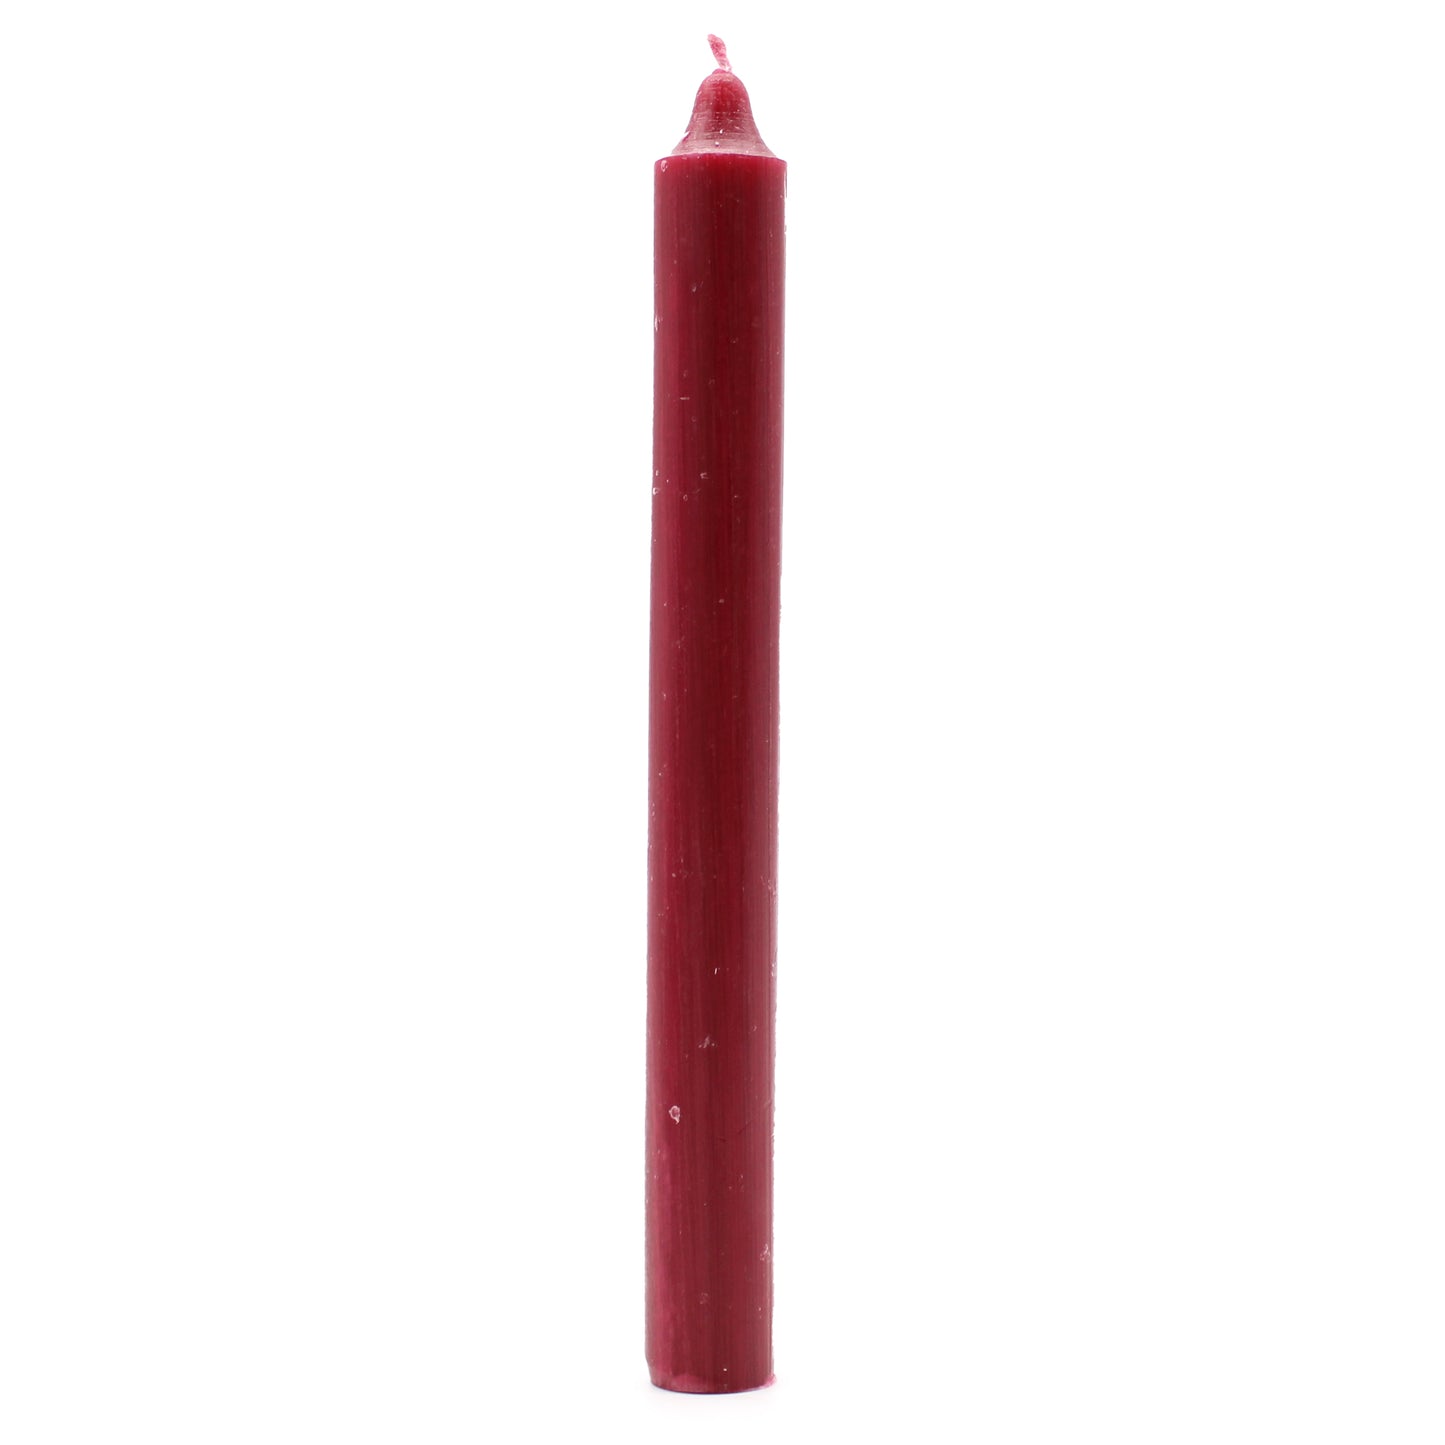 Solid Colour Dinner Candles - Rustic Burgandy - Pack of 5